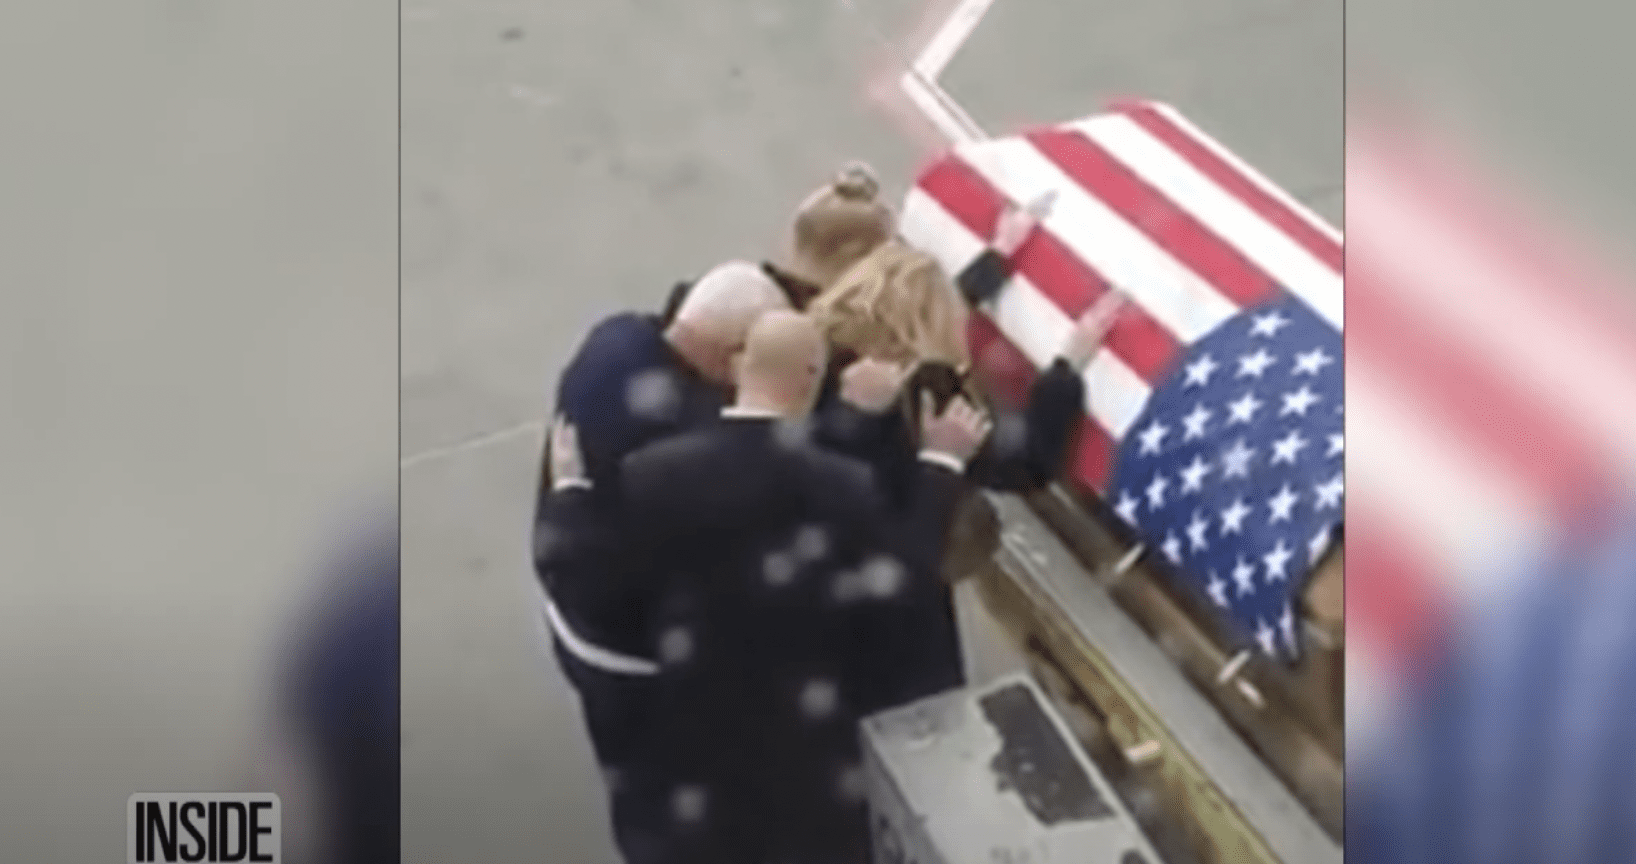 Tara is joined by her family as she breaks down standing near her late husband's coffin. | Source: YouTube.com/Inside Edition